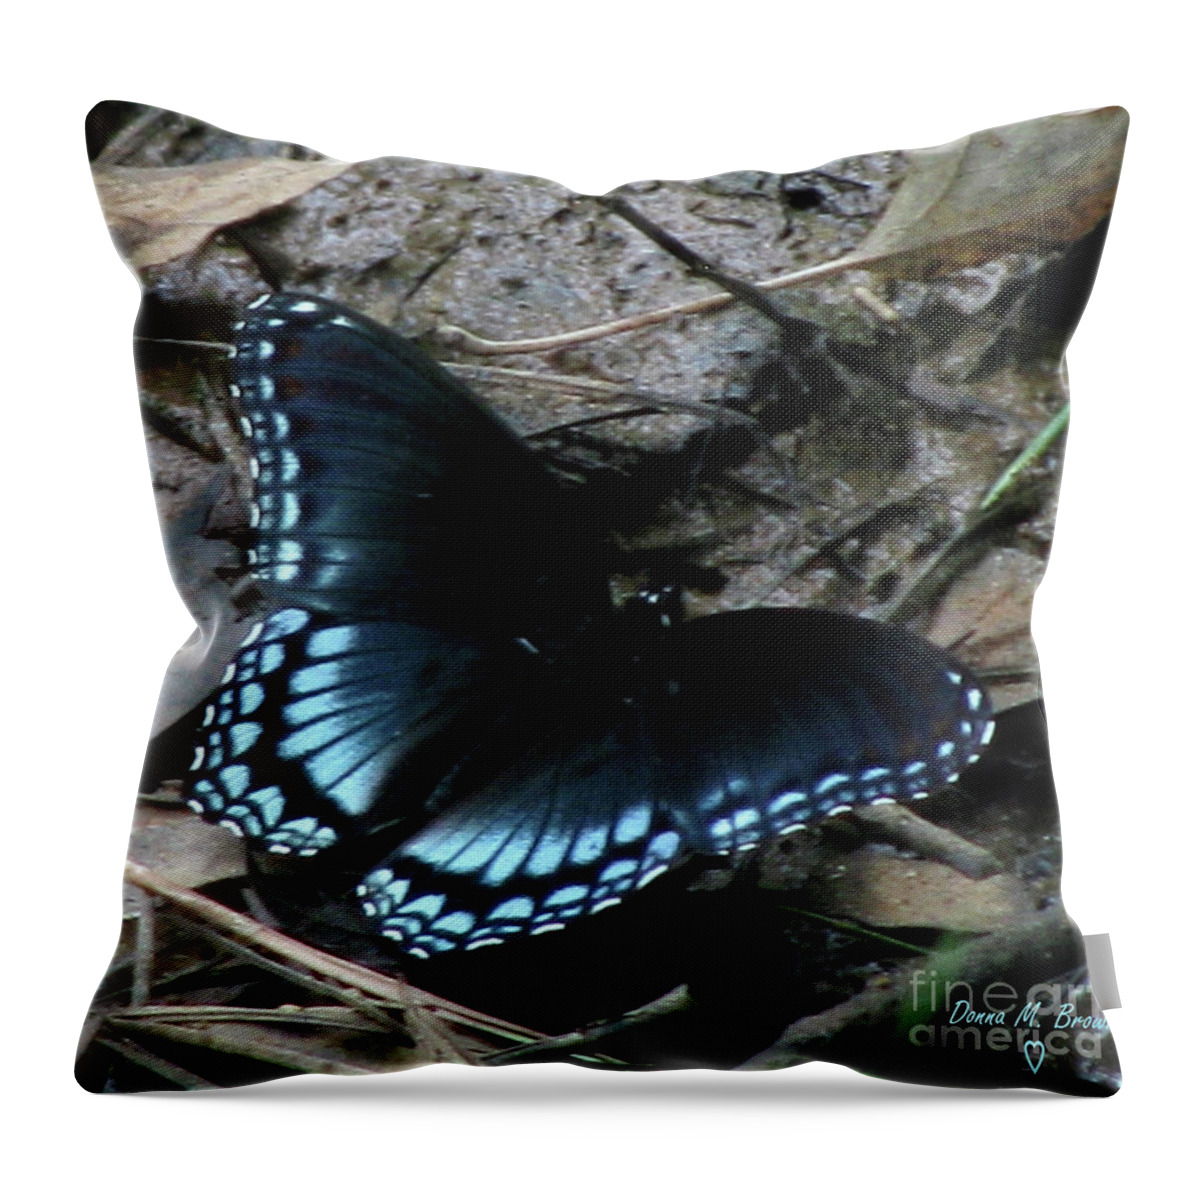 Butterfly Throw Pillow featuring the photograph Red Spotted Purple Swallowtail Butterfly by Donna Brown